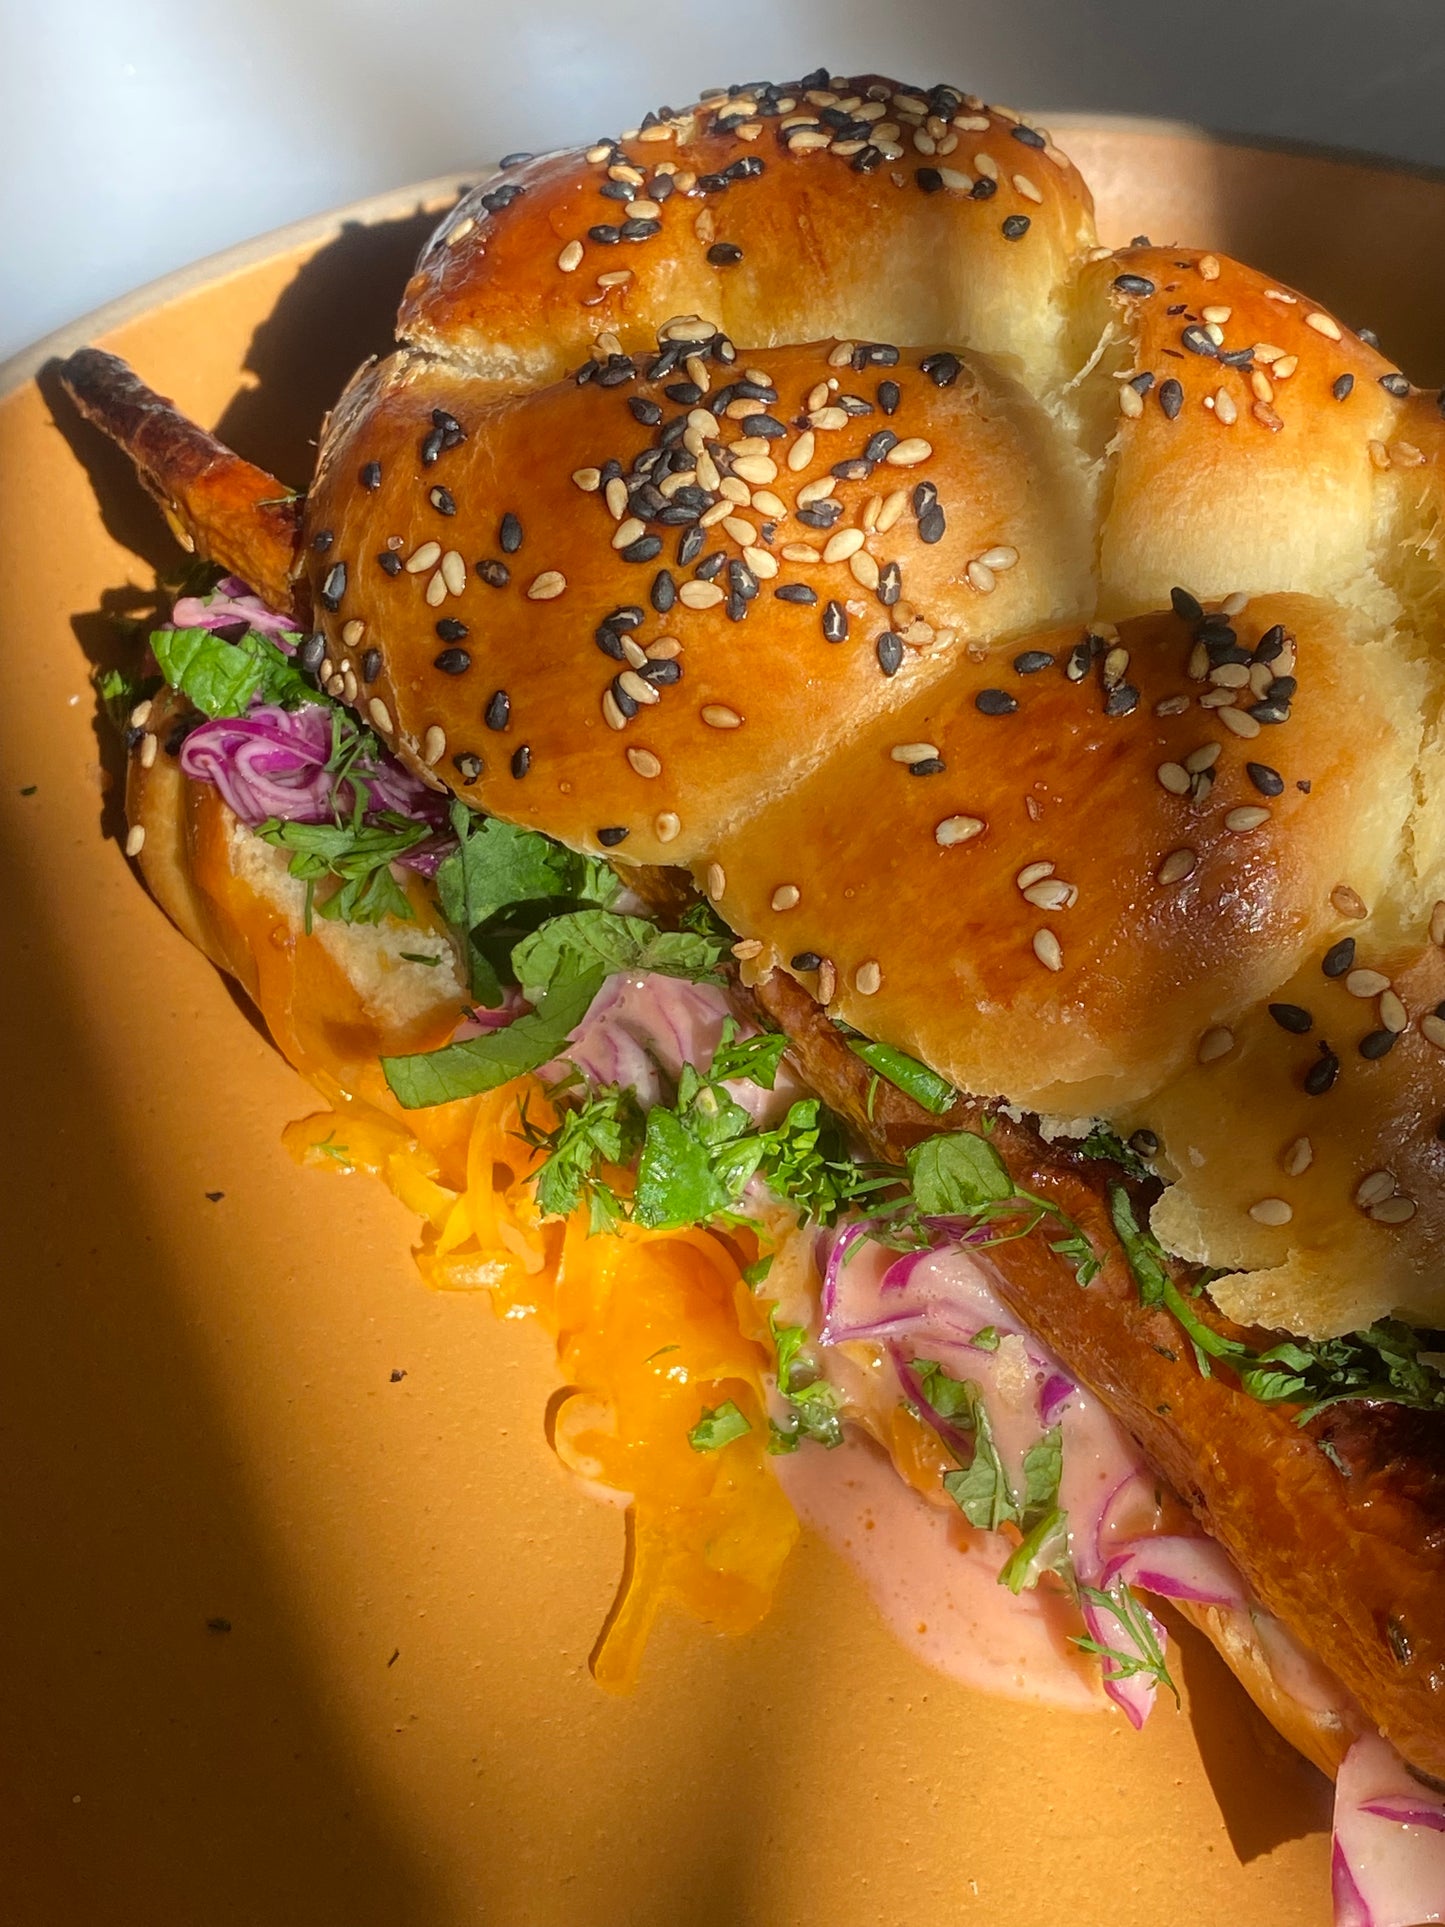 Roasted carrot & spiced coleslaw challah sandwich